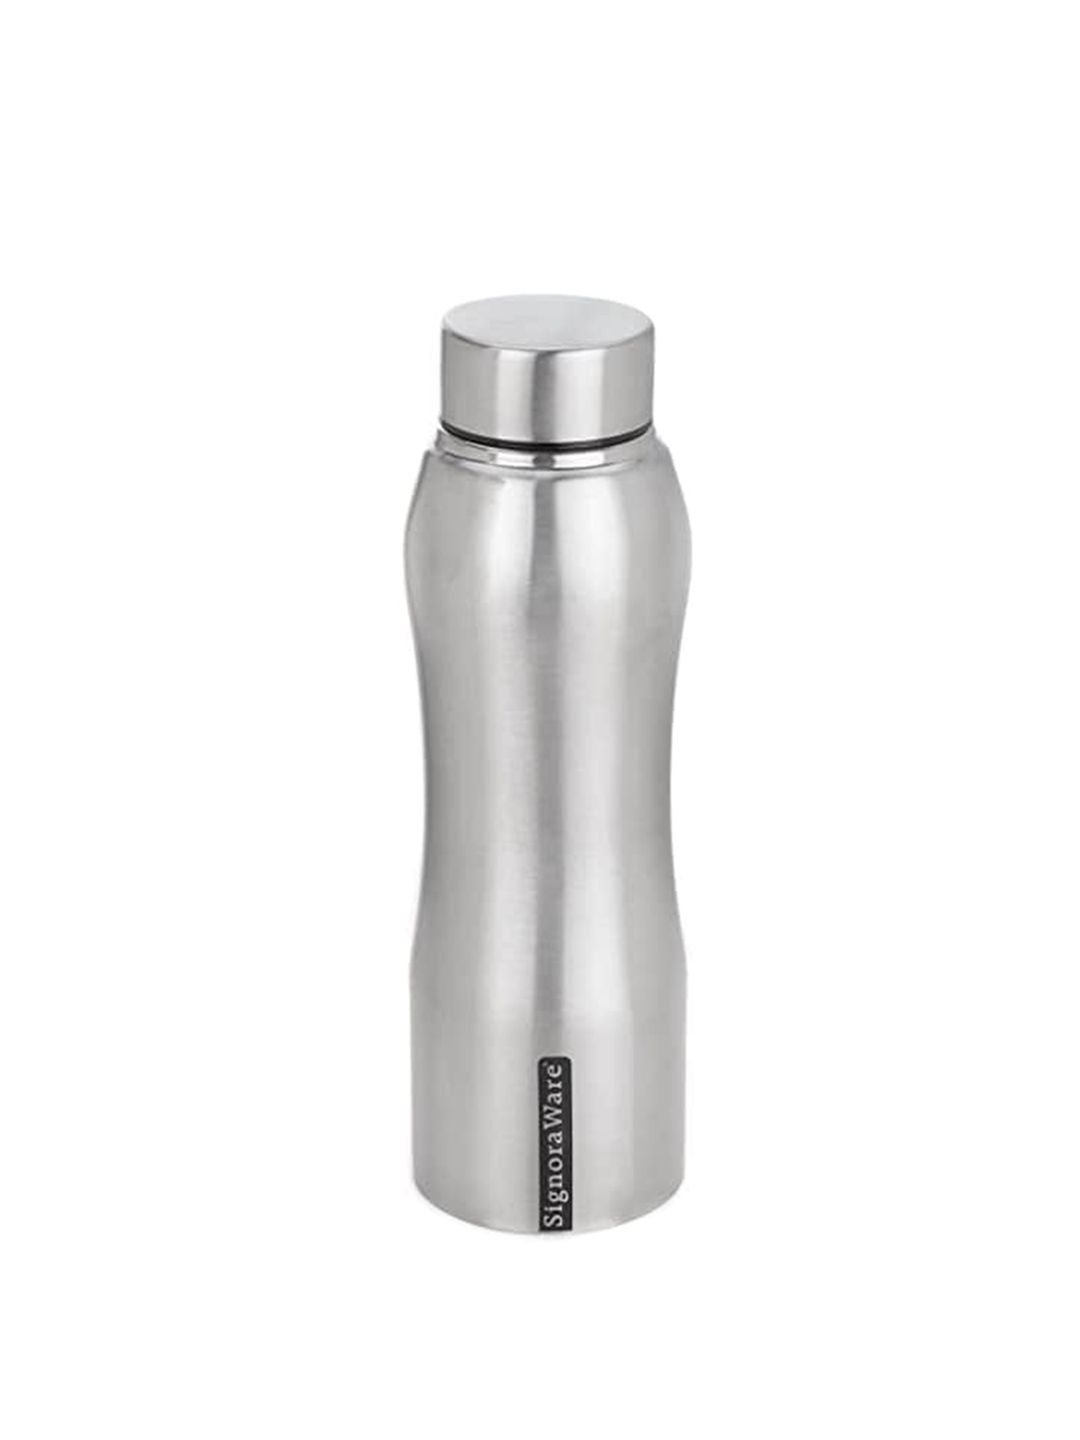 SignoraWare Silver-Toned Solid Water Bottle 750 Ml Price in India